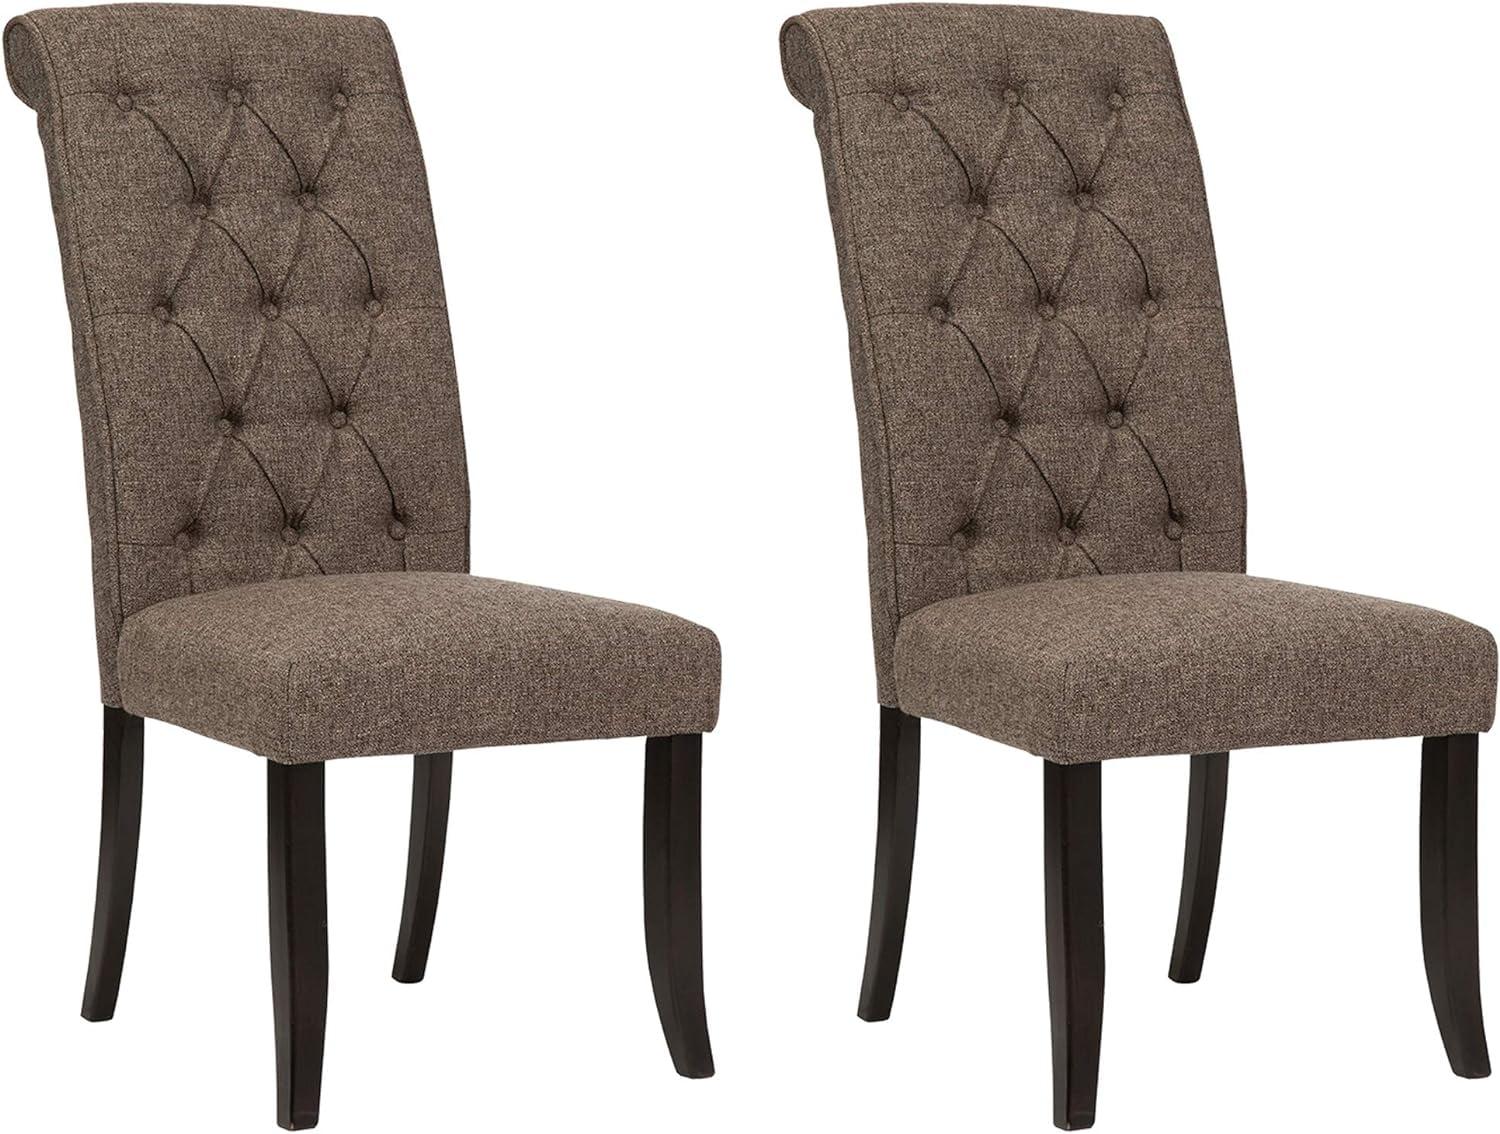 Tripton Graphite Linen Upholstered Side Chair with Tufted Back - Set of 2